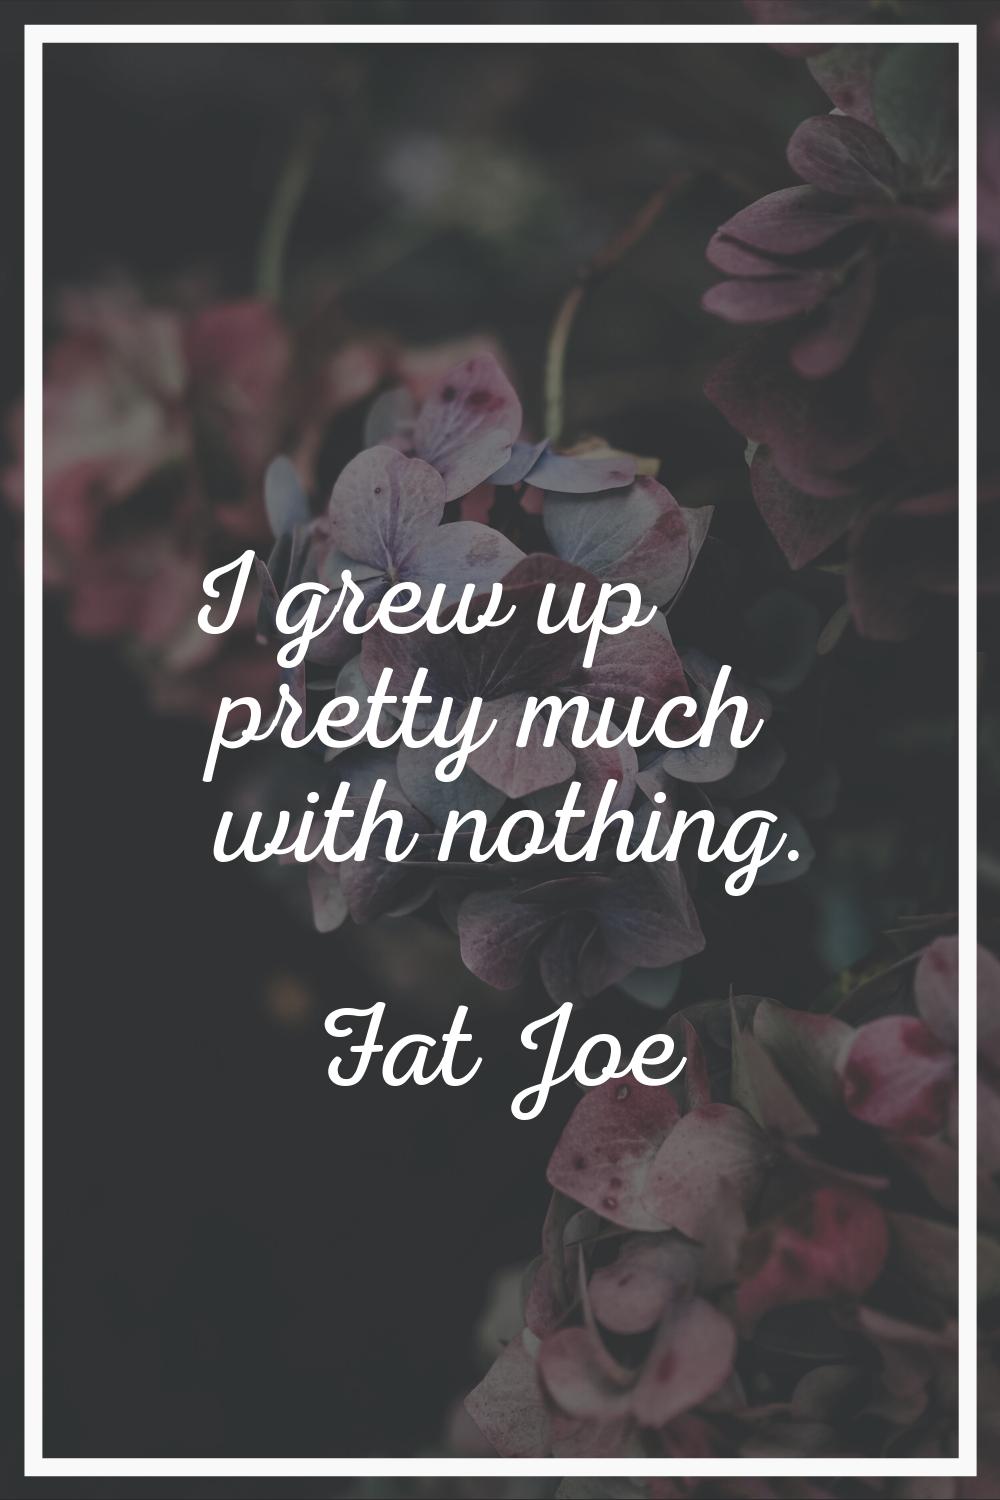 I grew up pretty much with nothing.